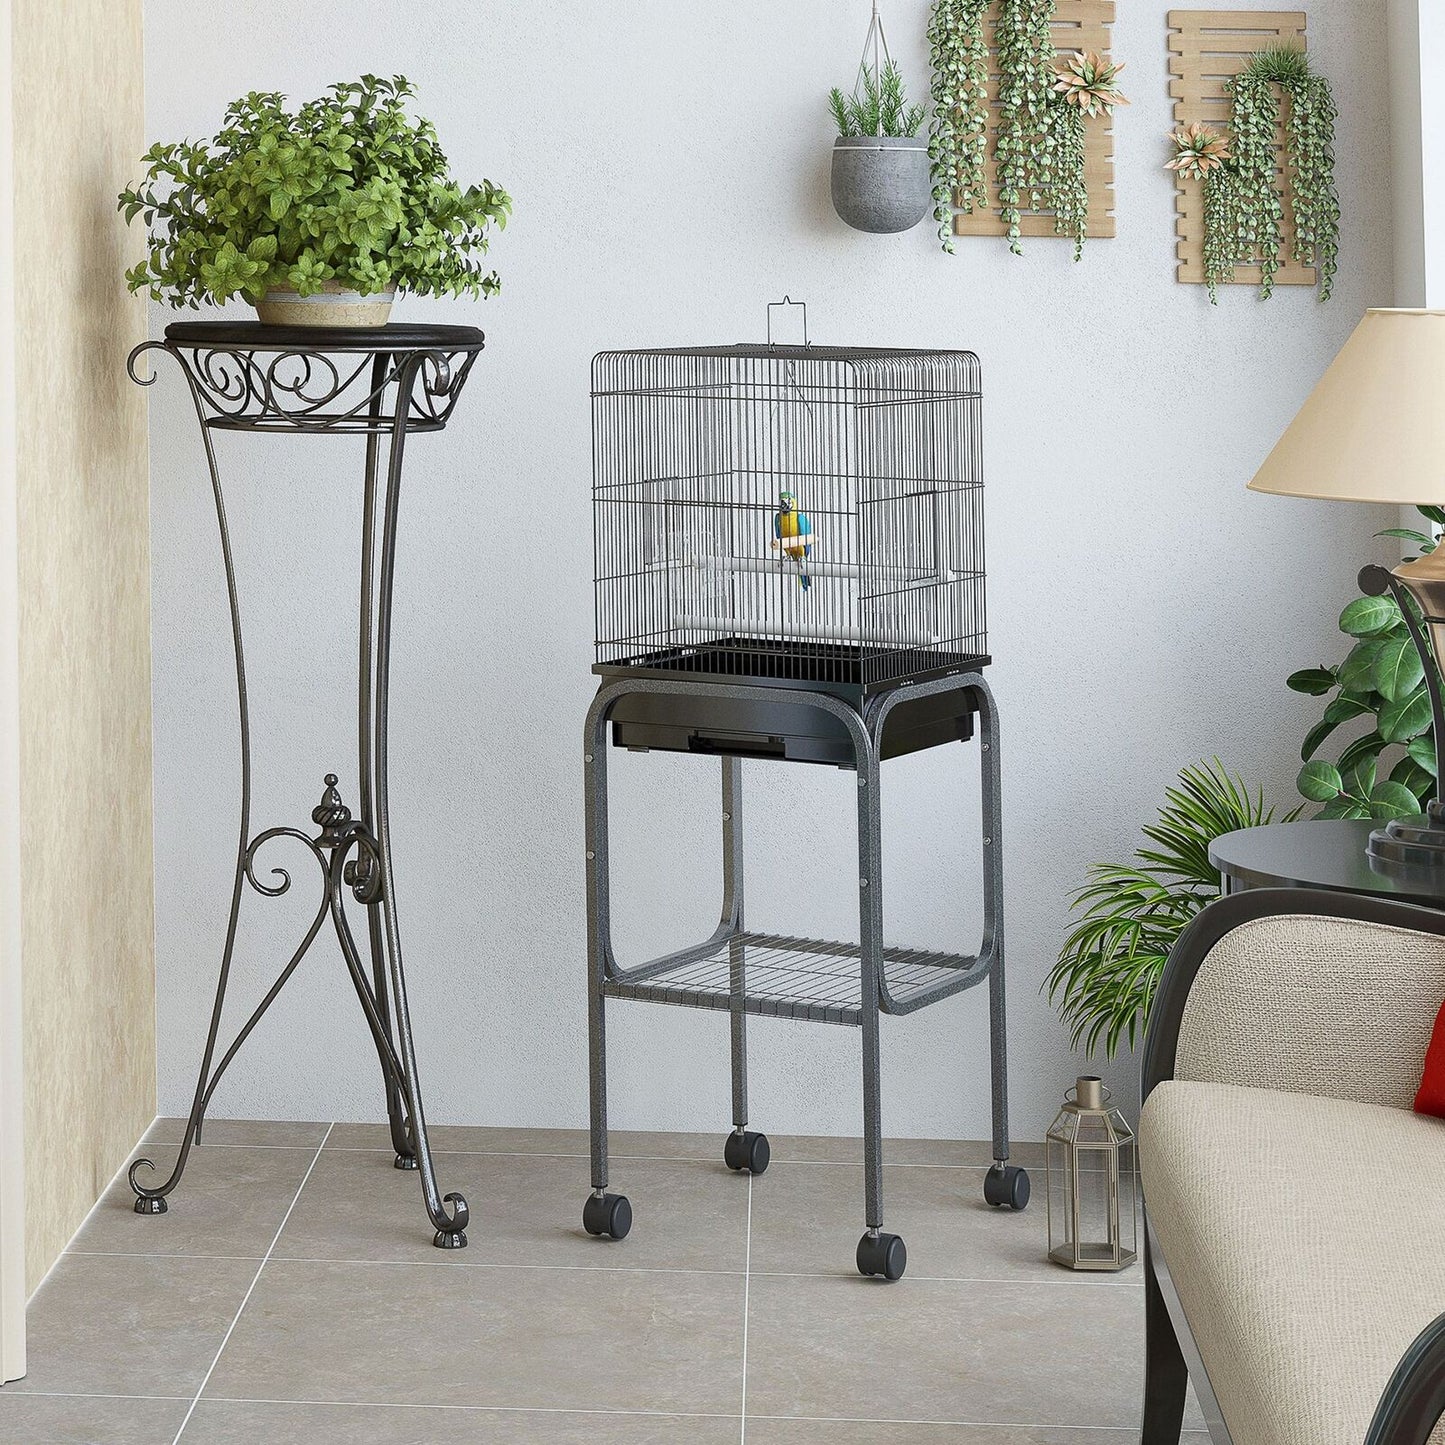 Bird Cage With Wheel - 44.5 Inches Metal Parrot Cage